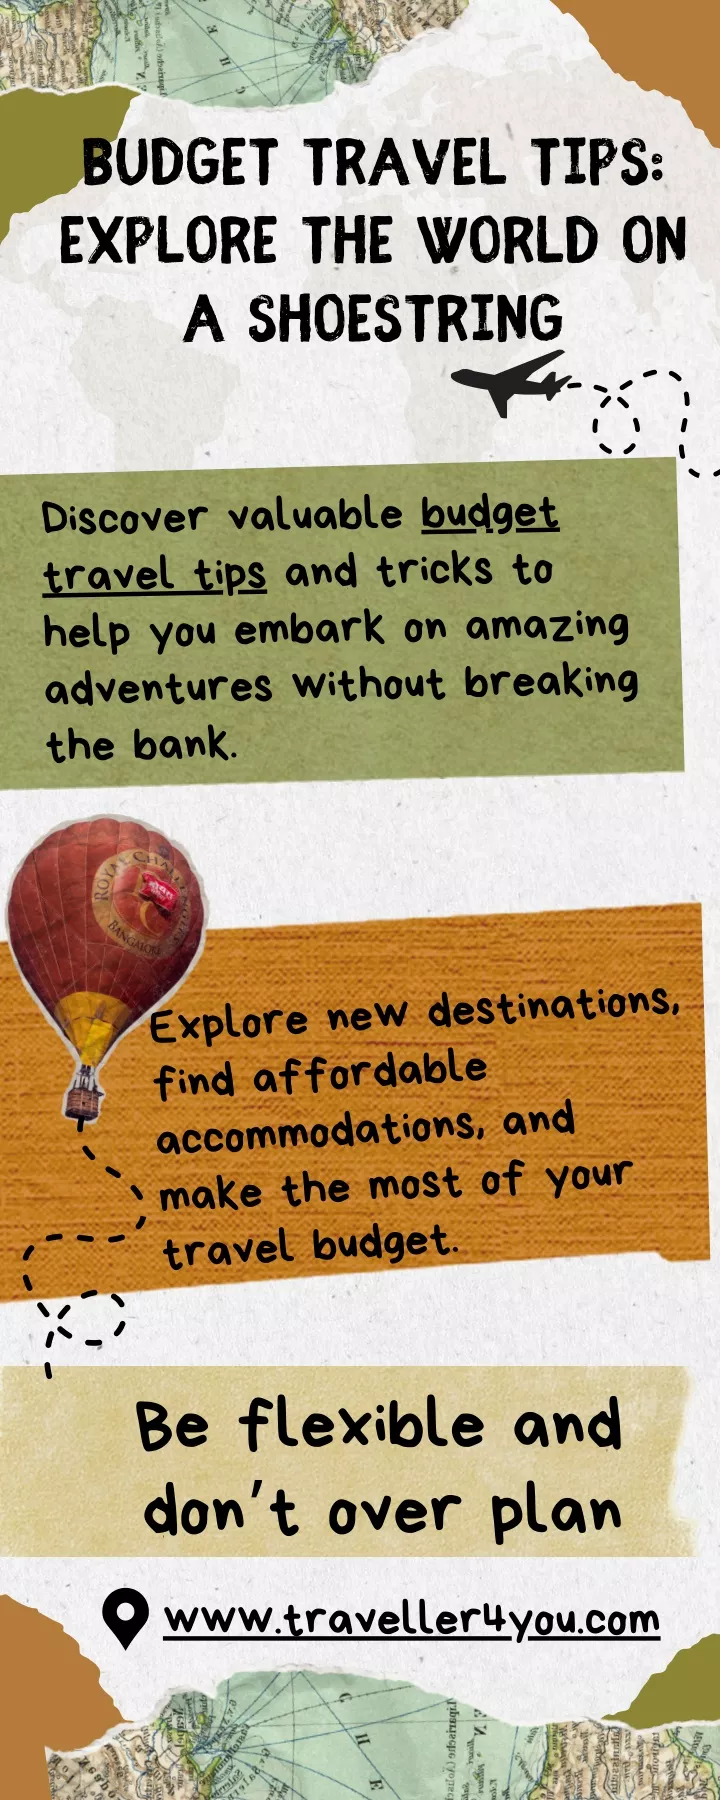 budget travel tips explore the world